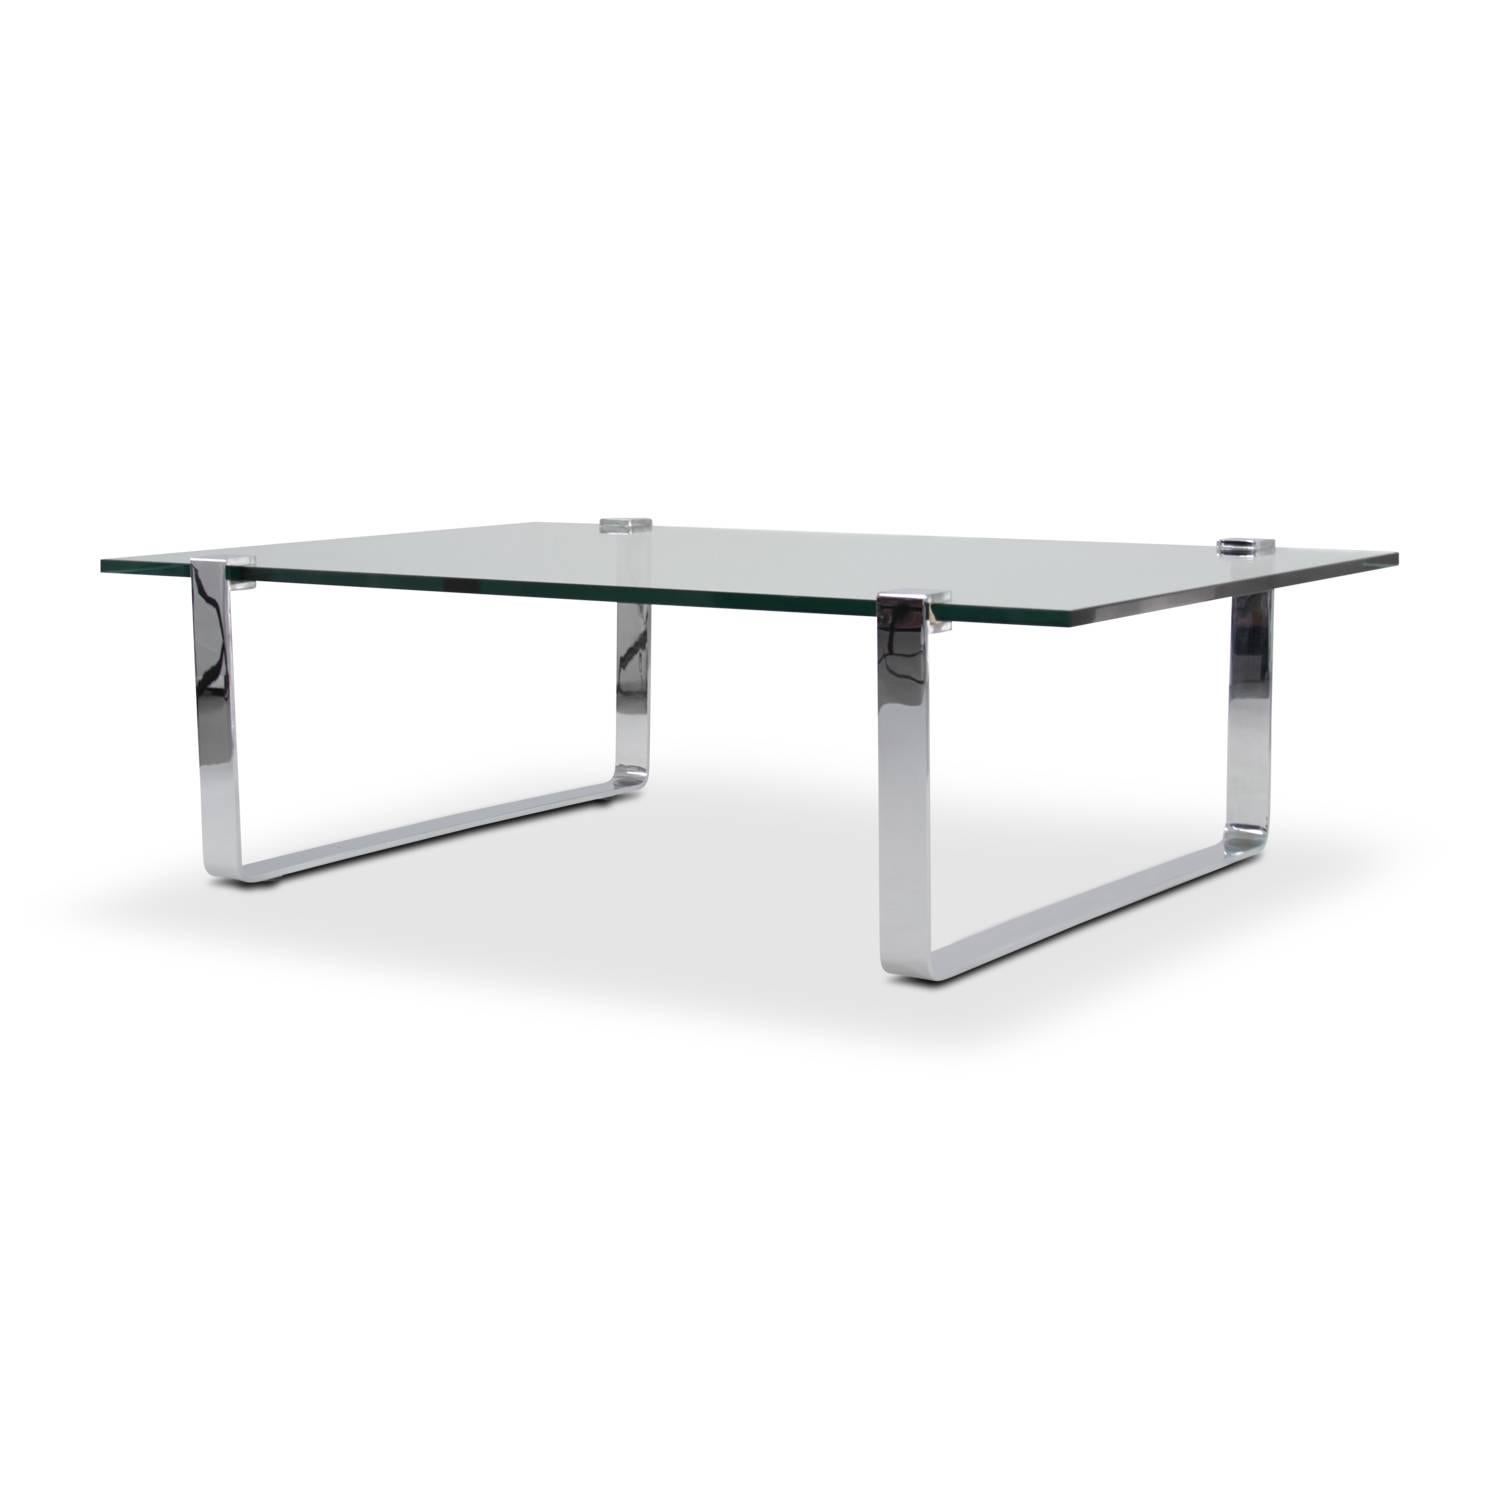 Rectangular Ronald Schmitt coffee table with a 19 mm glass top and runners in solid steel polished chrome. Modell K 831 by Friedrich Wilhelm Möller.



  